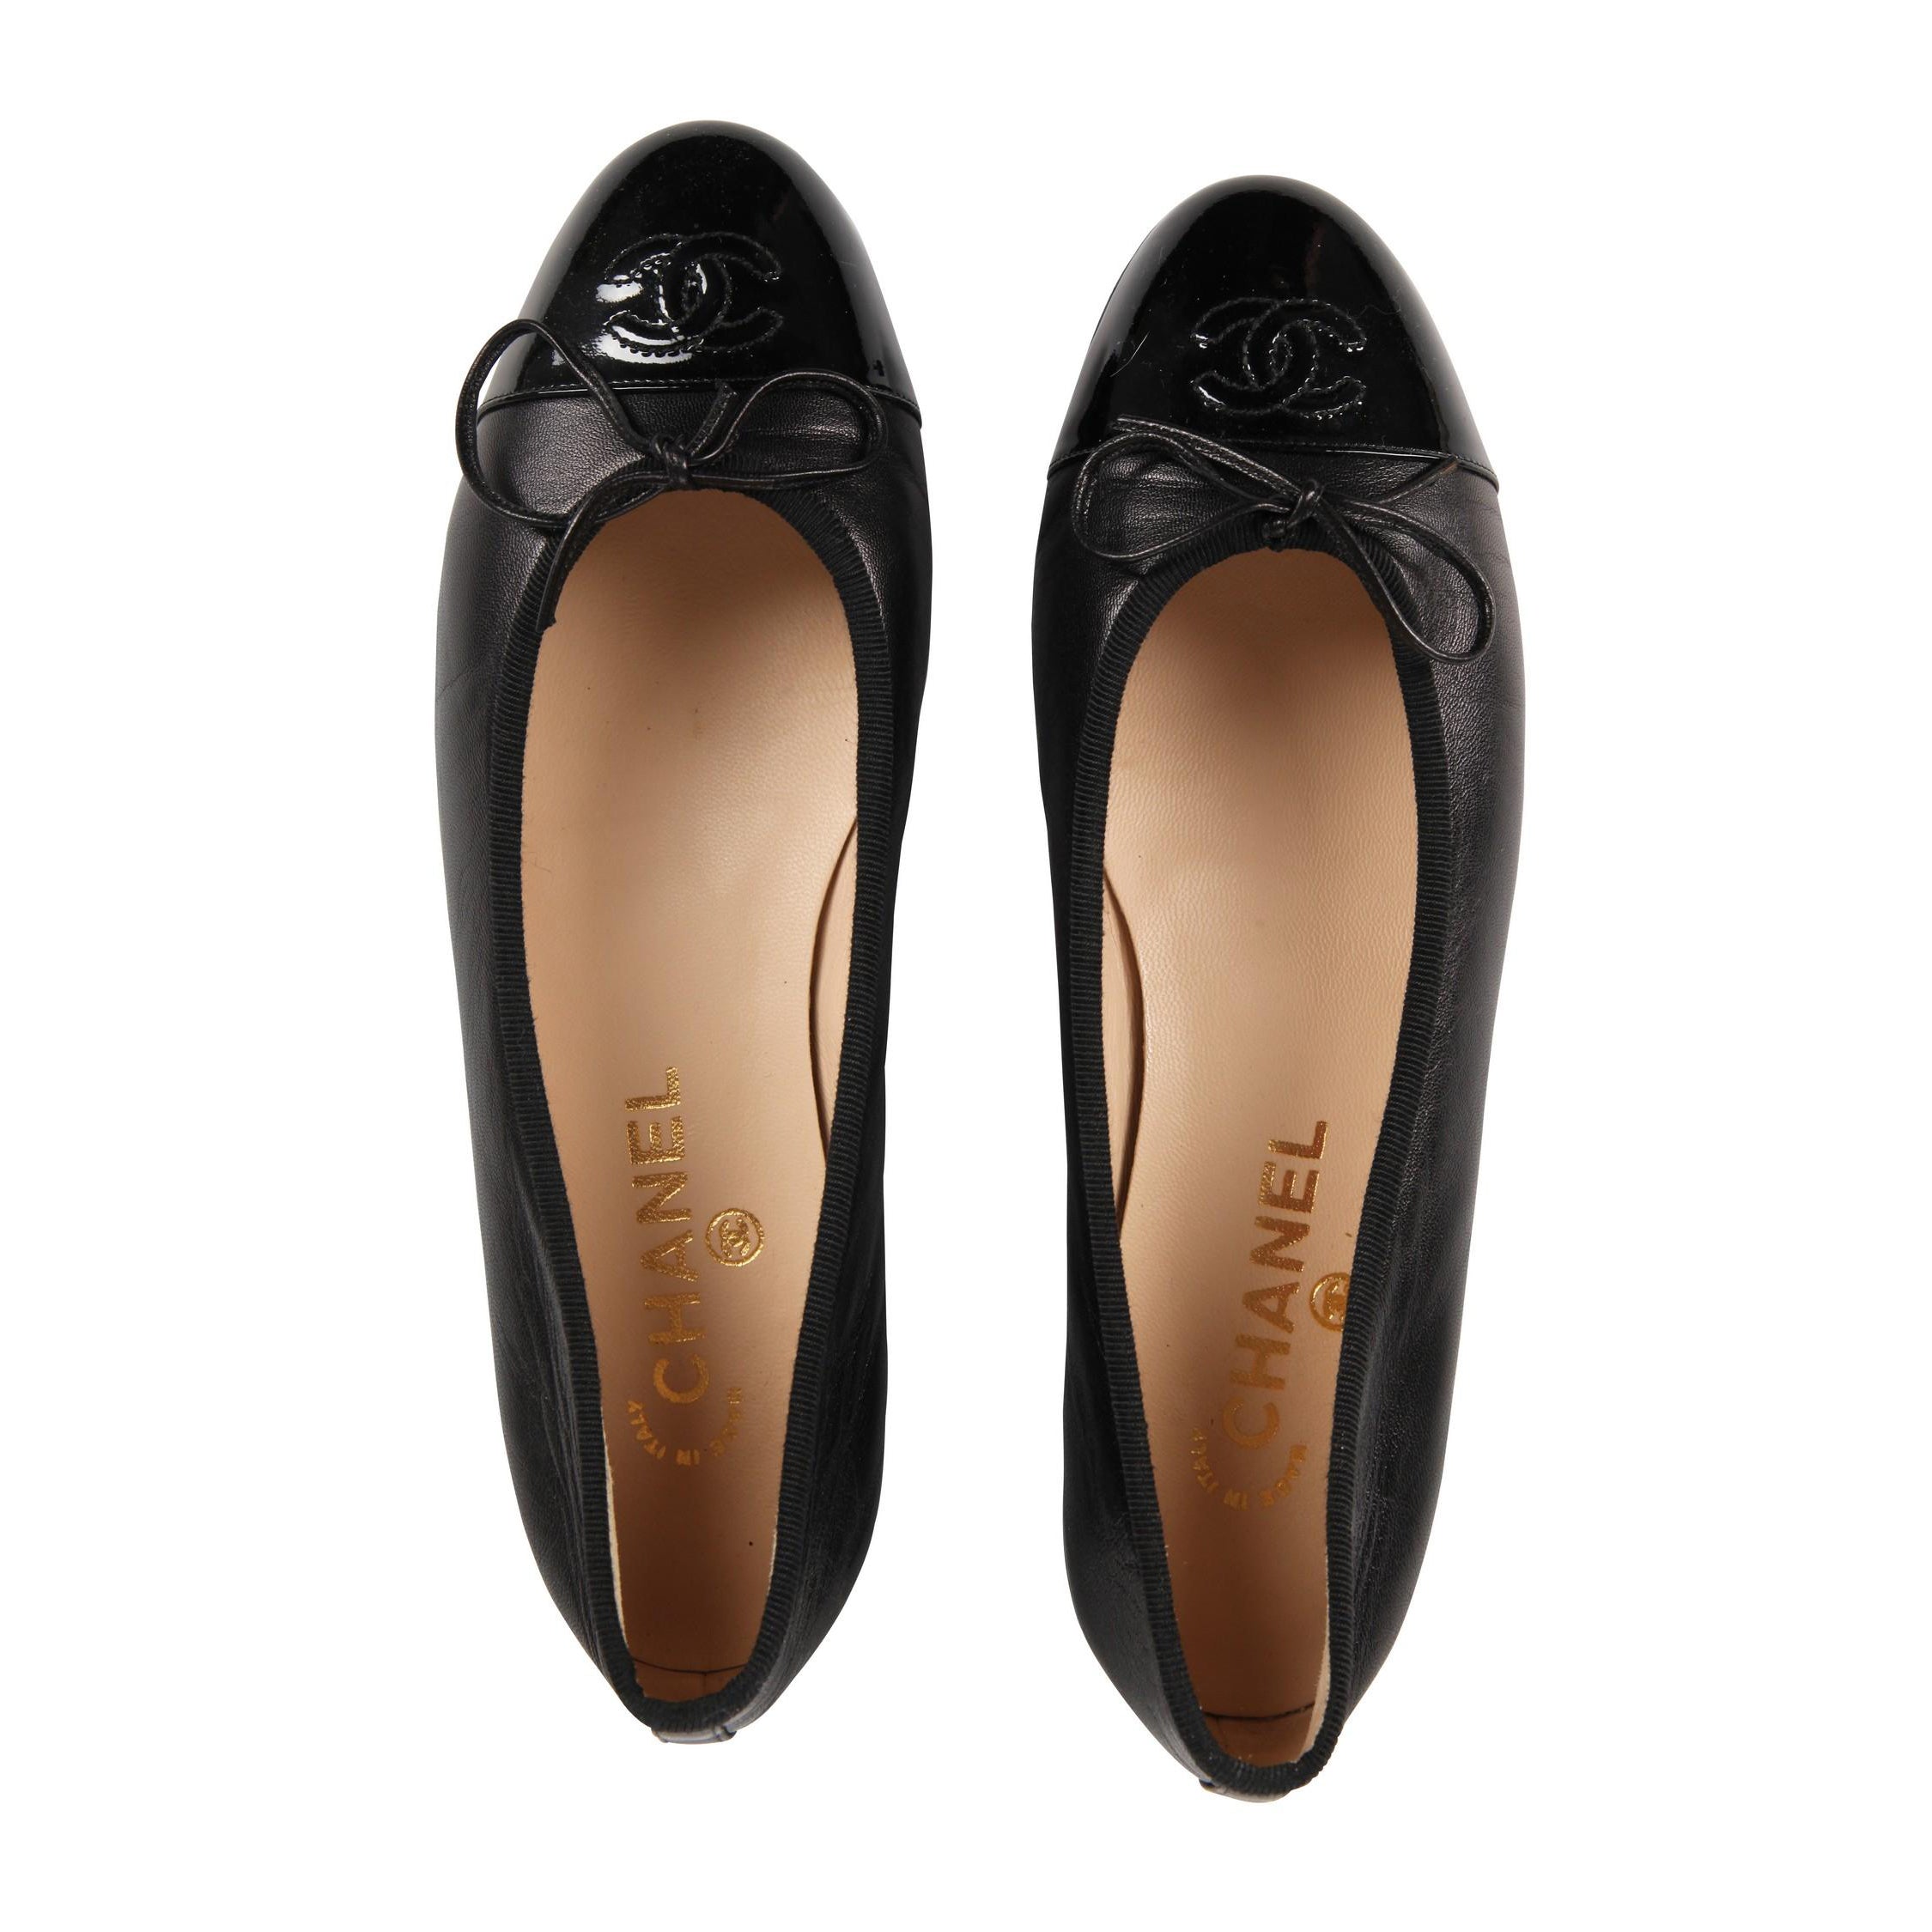 Leather ballet flats Chanel Black size 38.5 EU in Leather - 32039896